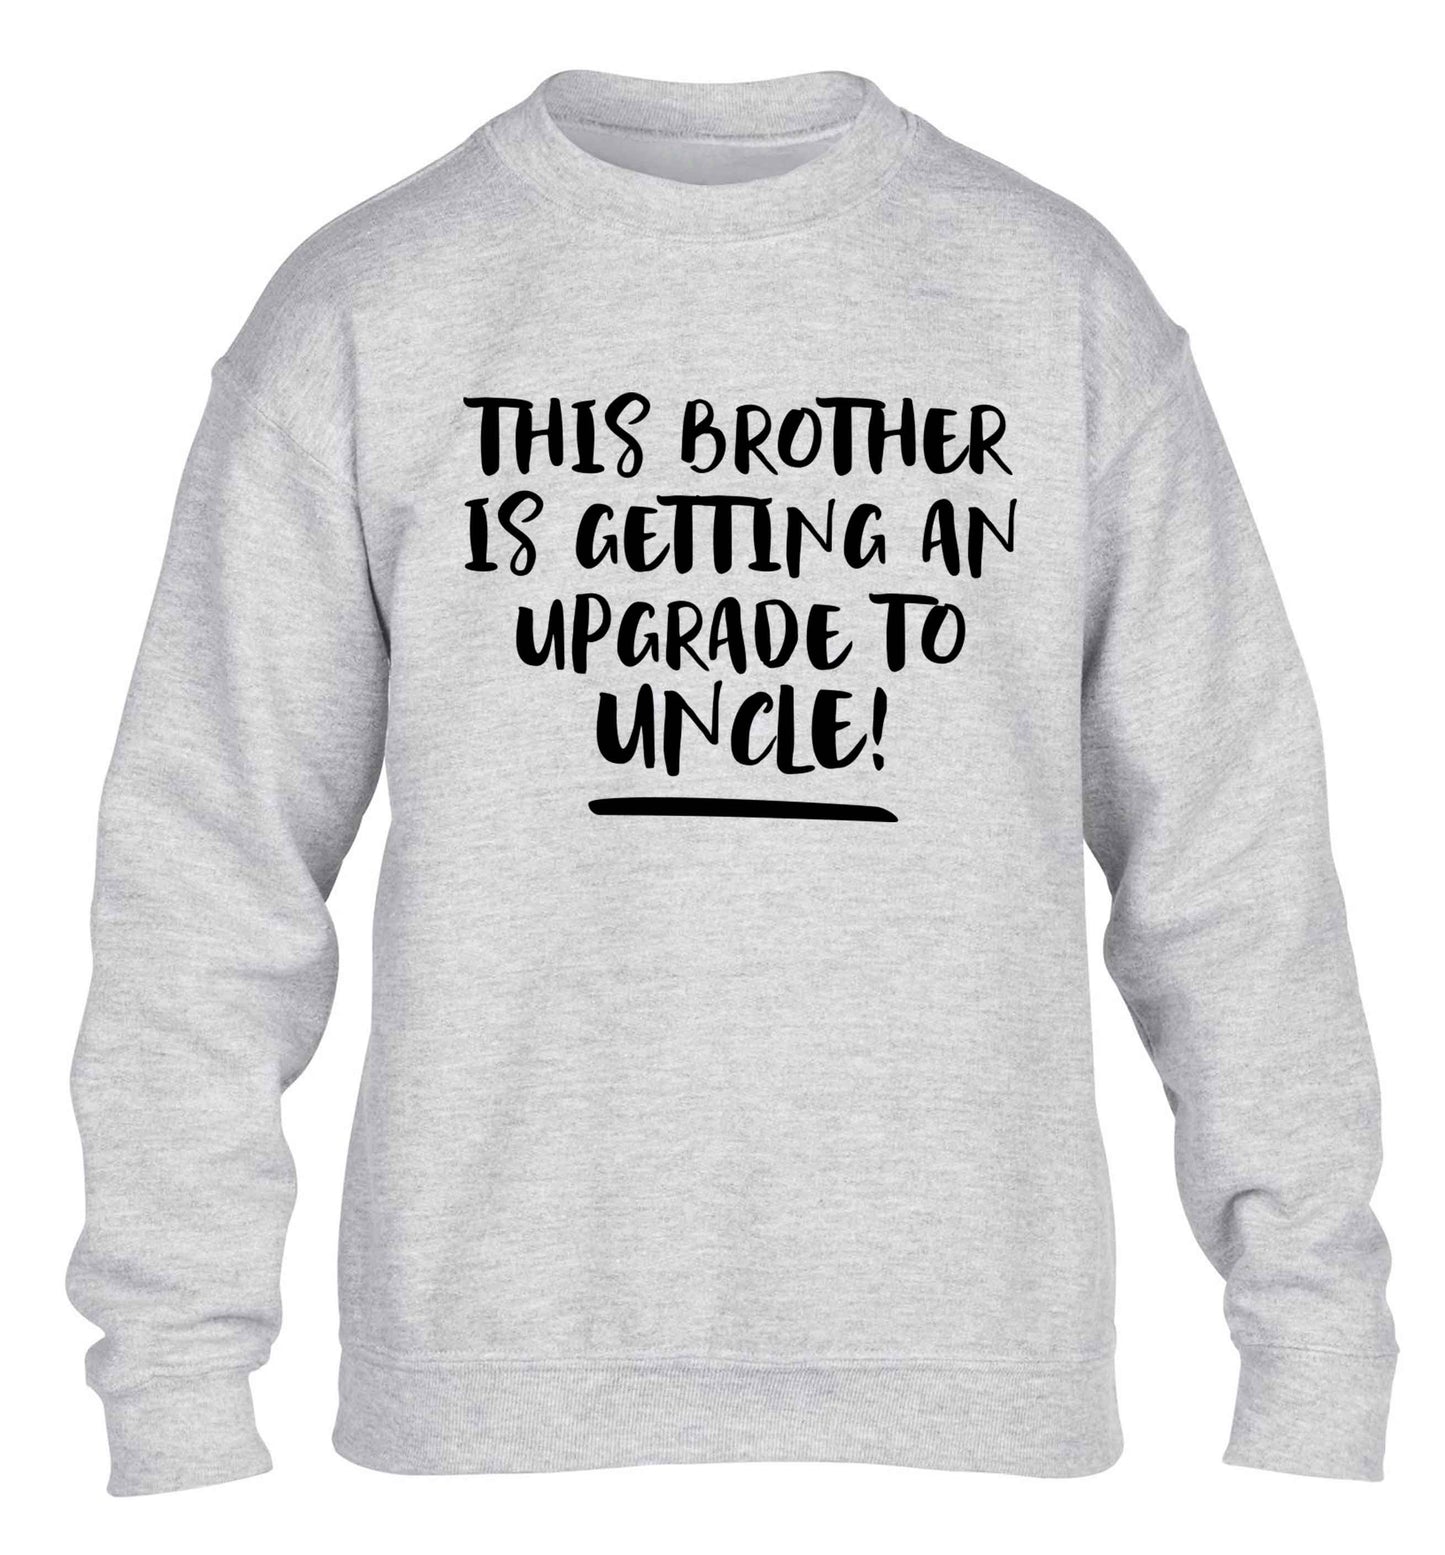 This brother is getting an upgrade to uncle! children's grey sweater 12-13 Years